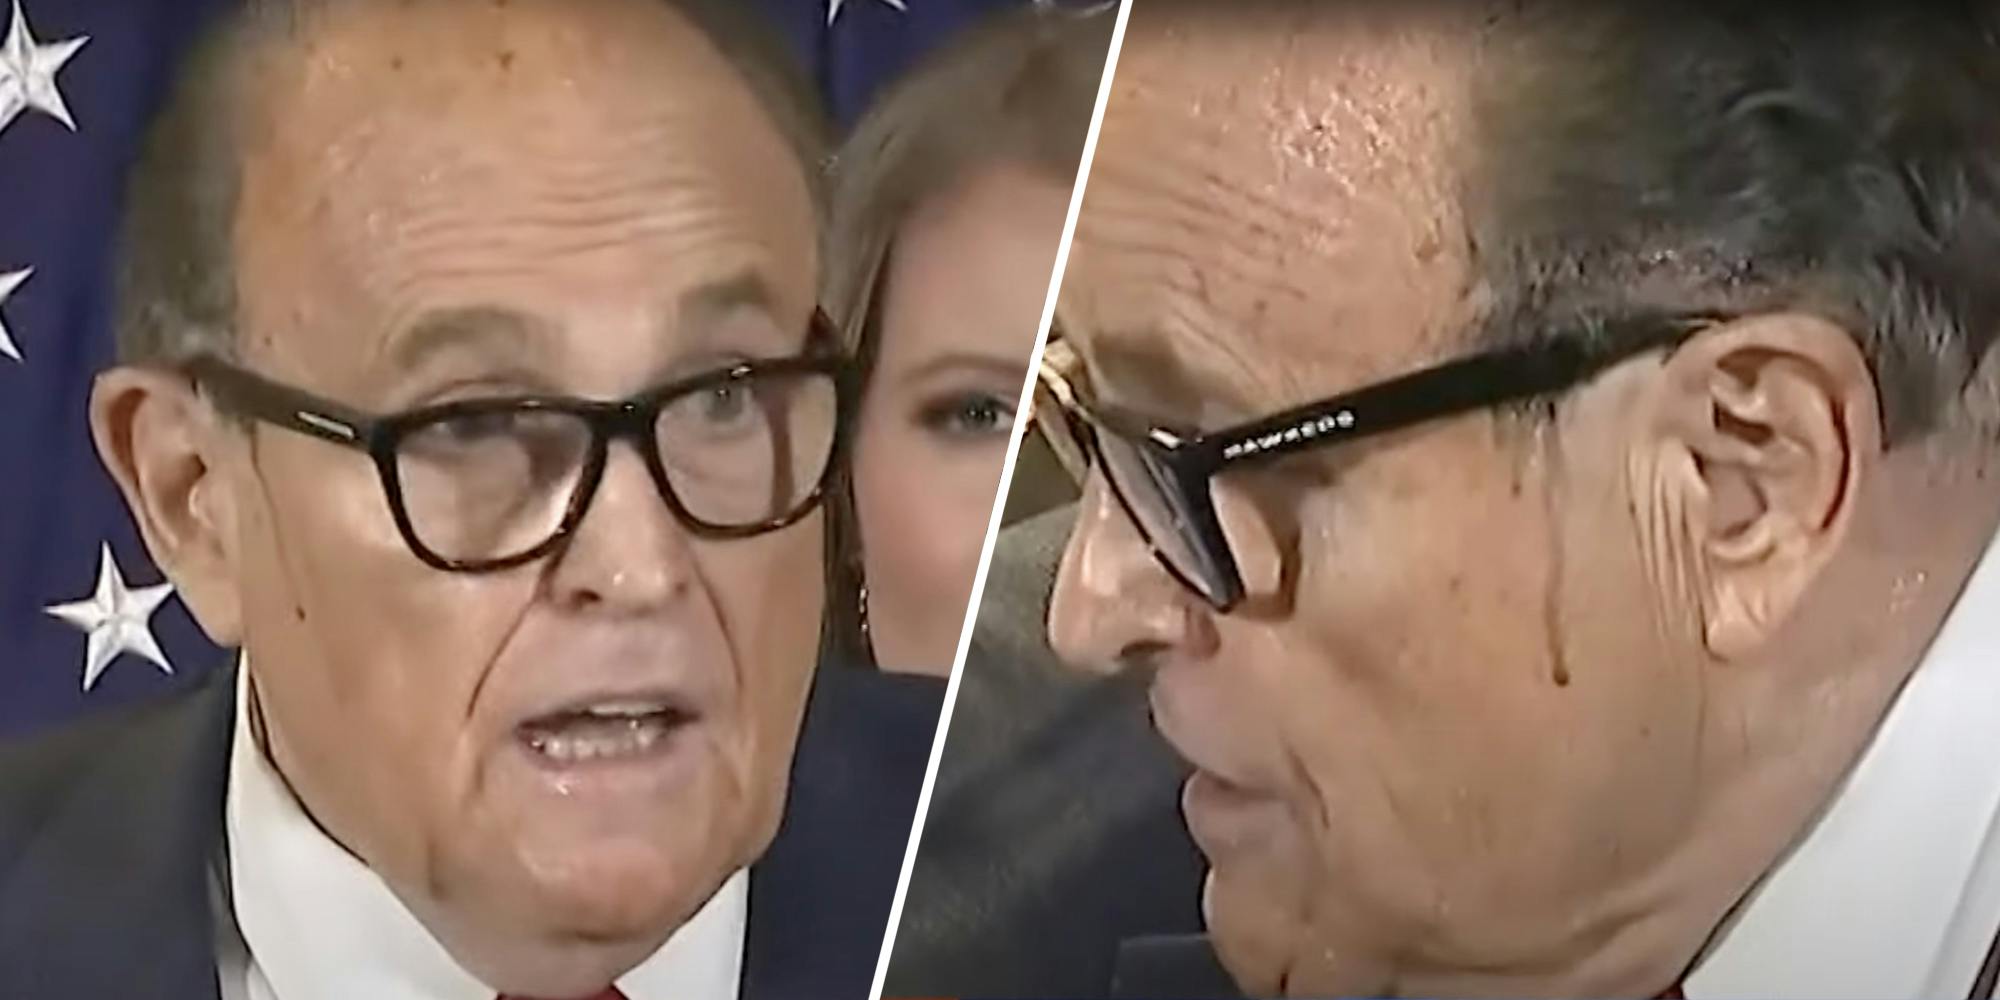 Giuliani Bought A Film On Overcoming Addiction To Aduly Content [Video]